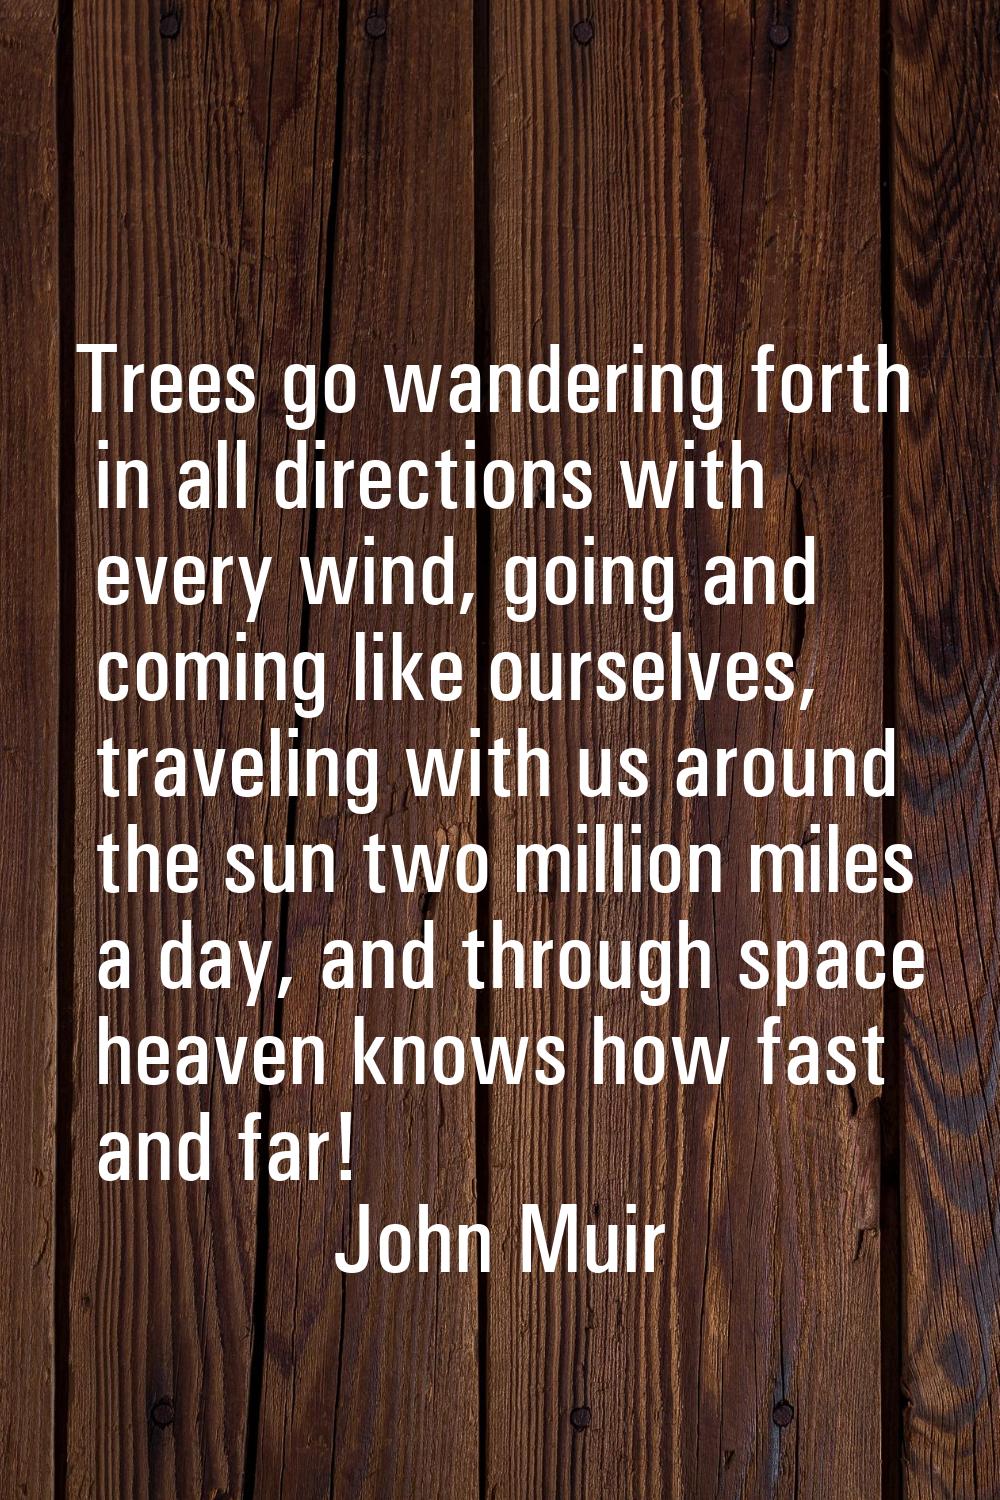 Trees go wandering forth in all directions with every wind, going and coming like ourselves, travel